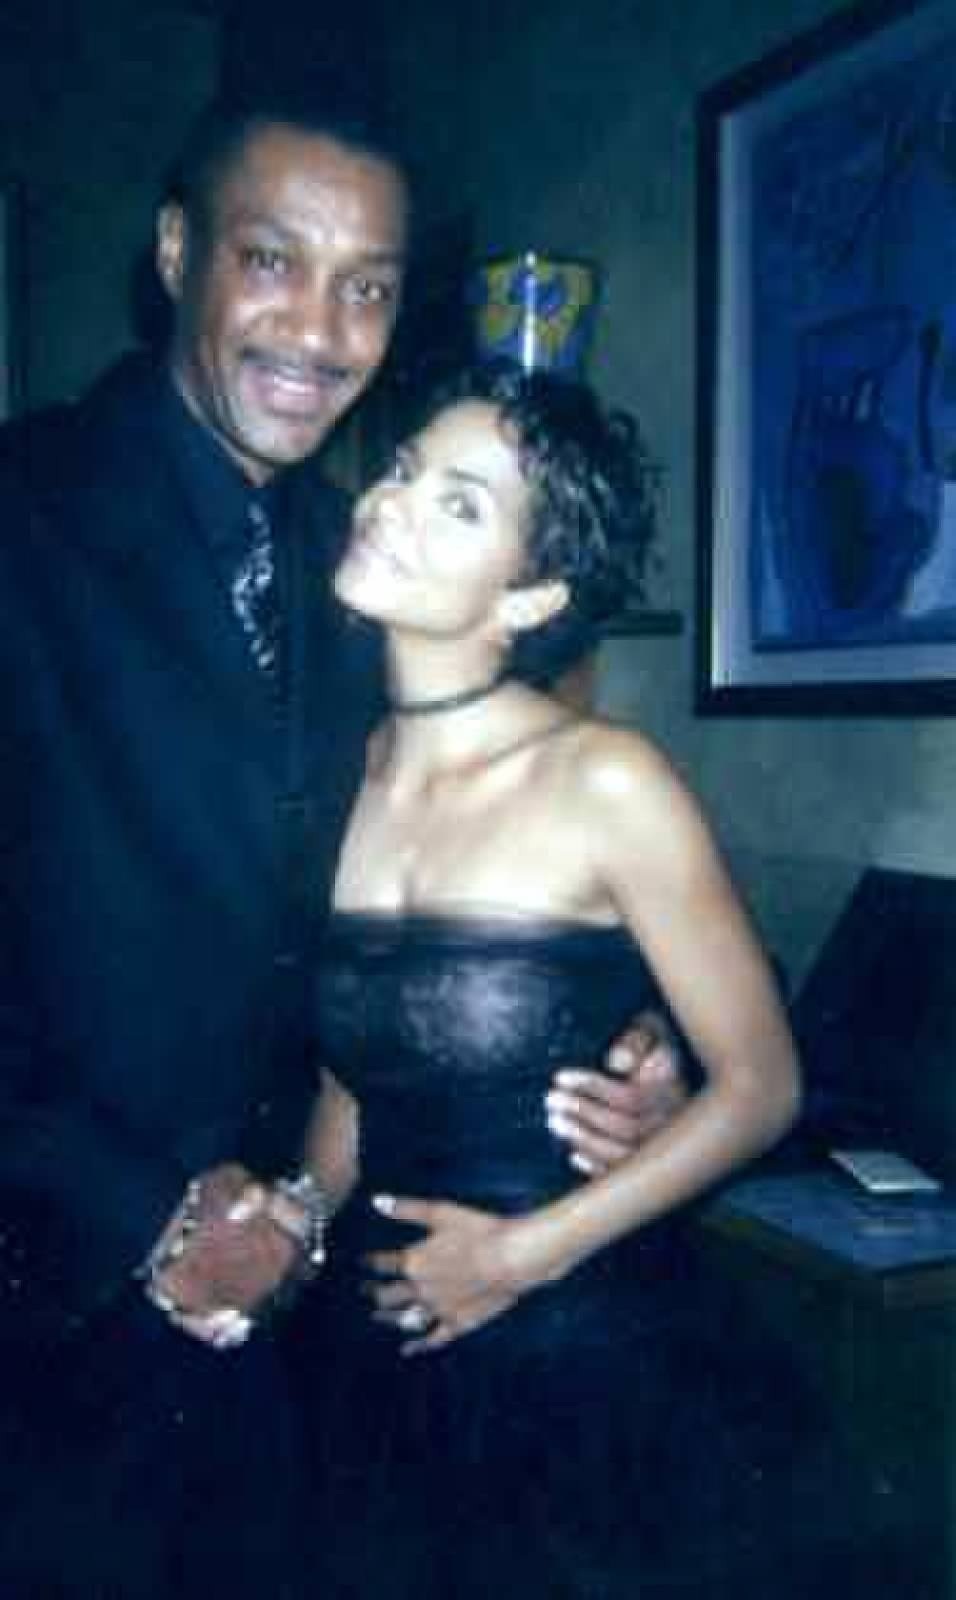 HBO 2000 Emmys after party at Spago Beverly Hills - Nathaniel Bellamy Jr., Halle Berry